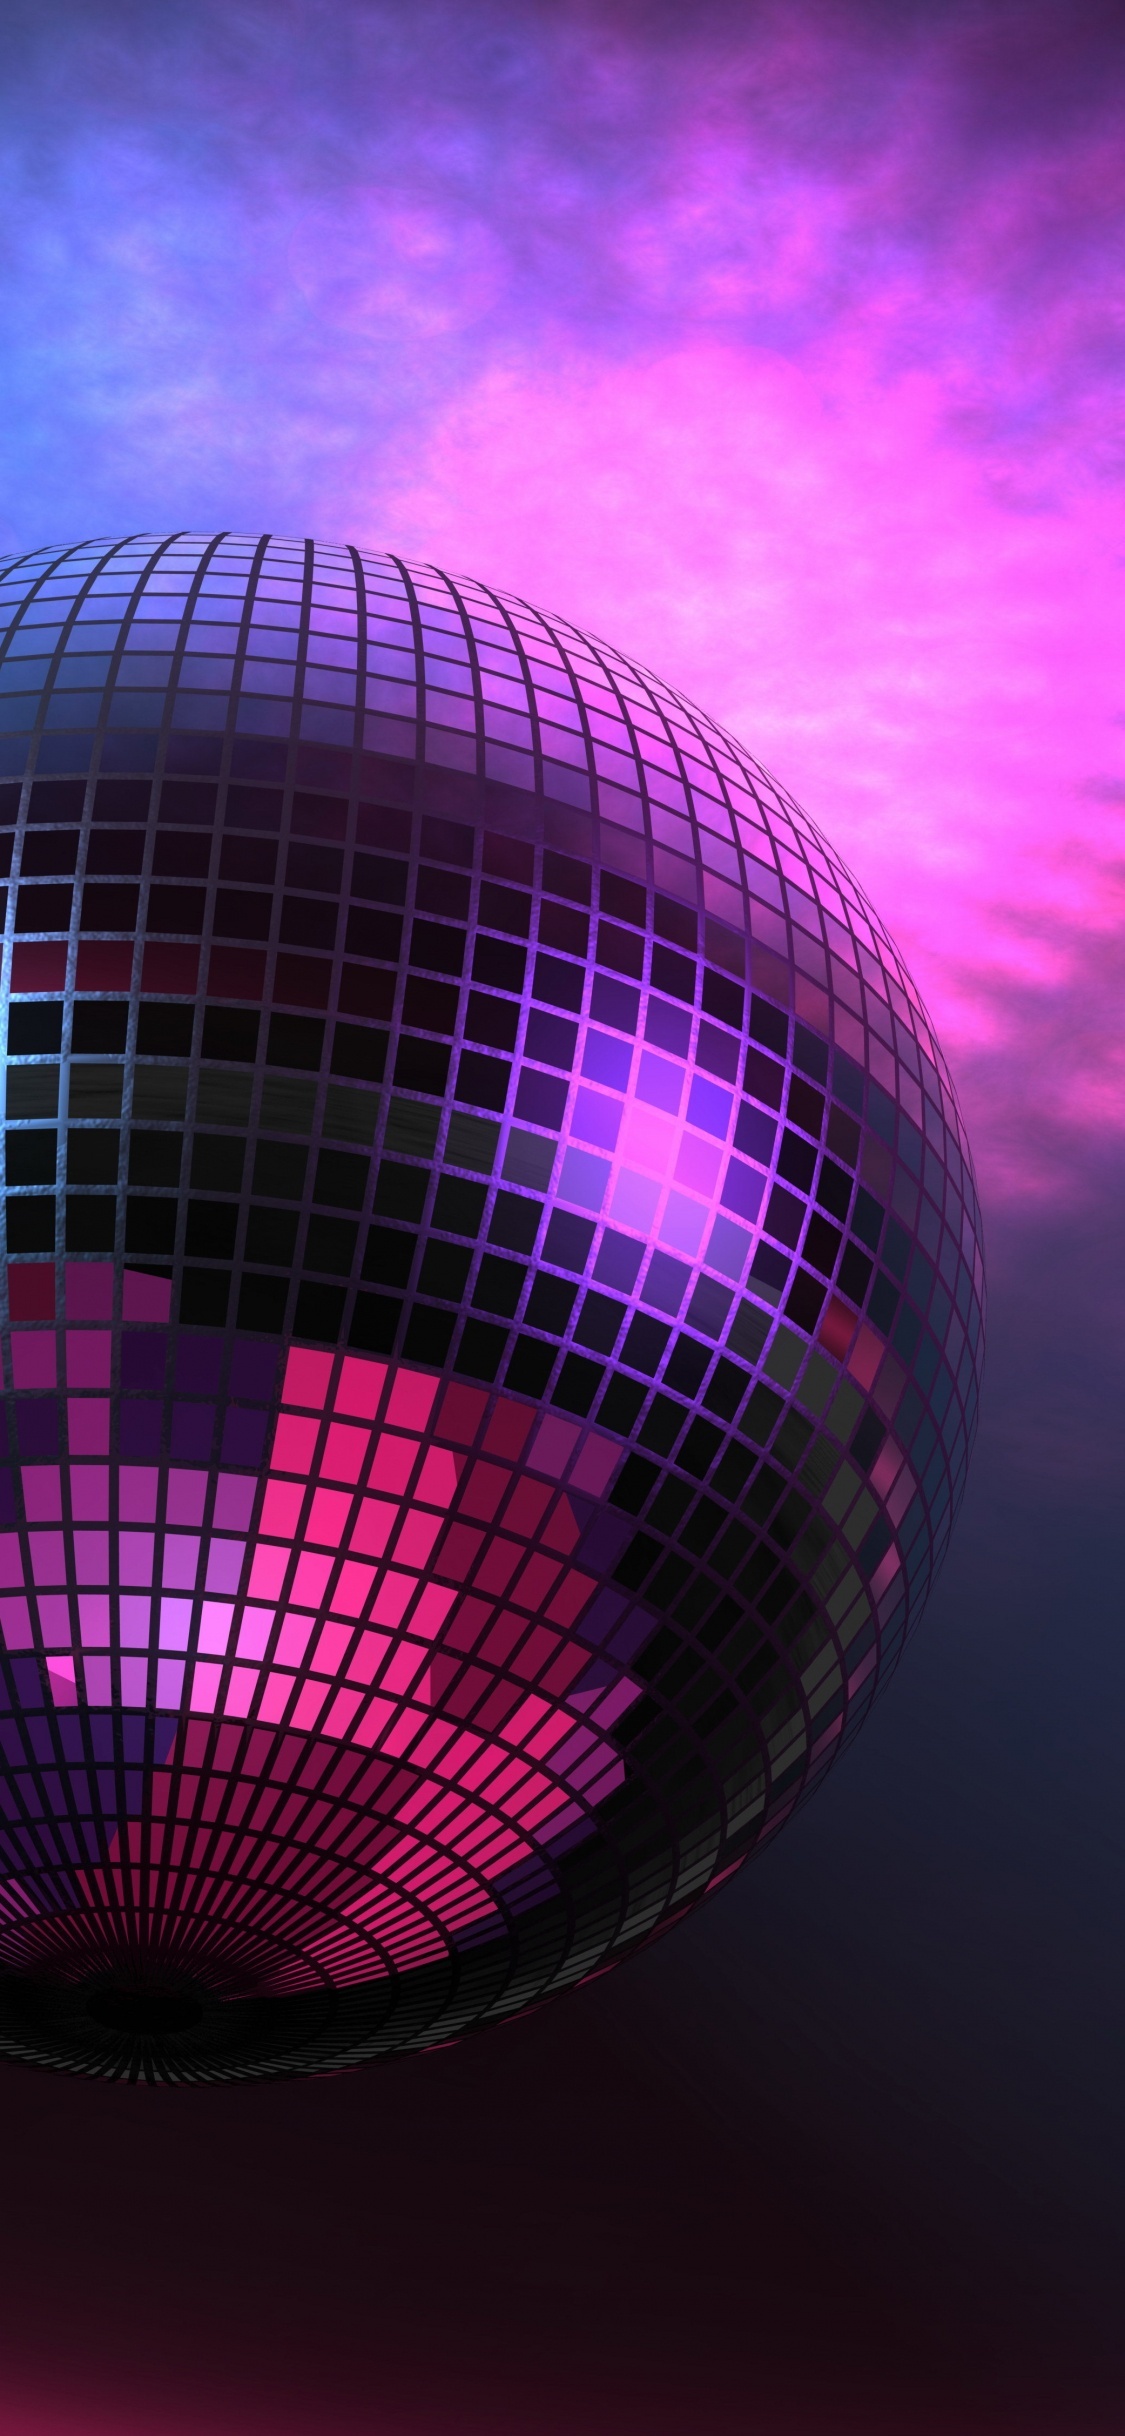 Discotheque: Party lights, A ball reflecting beams of light moving around, Atmospheric. 1130x2440 HD Wallpaper.